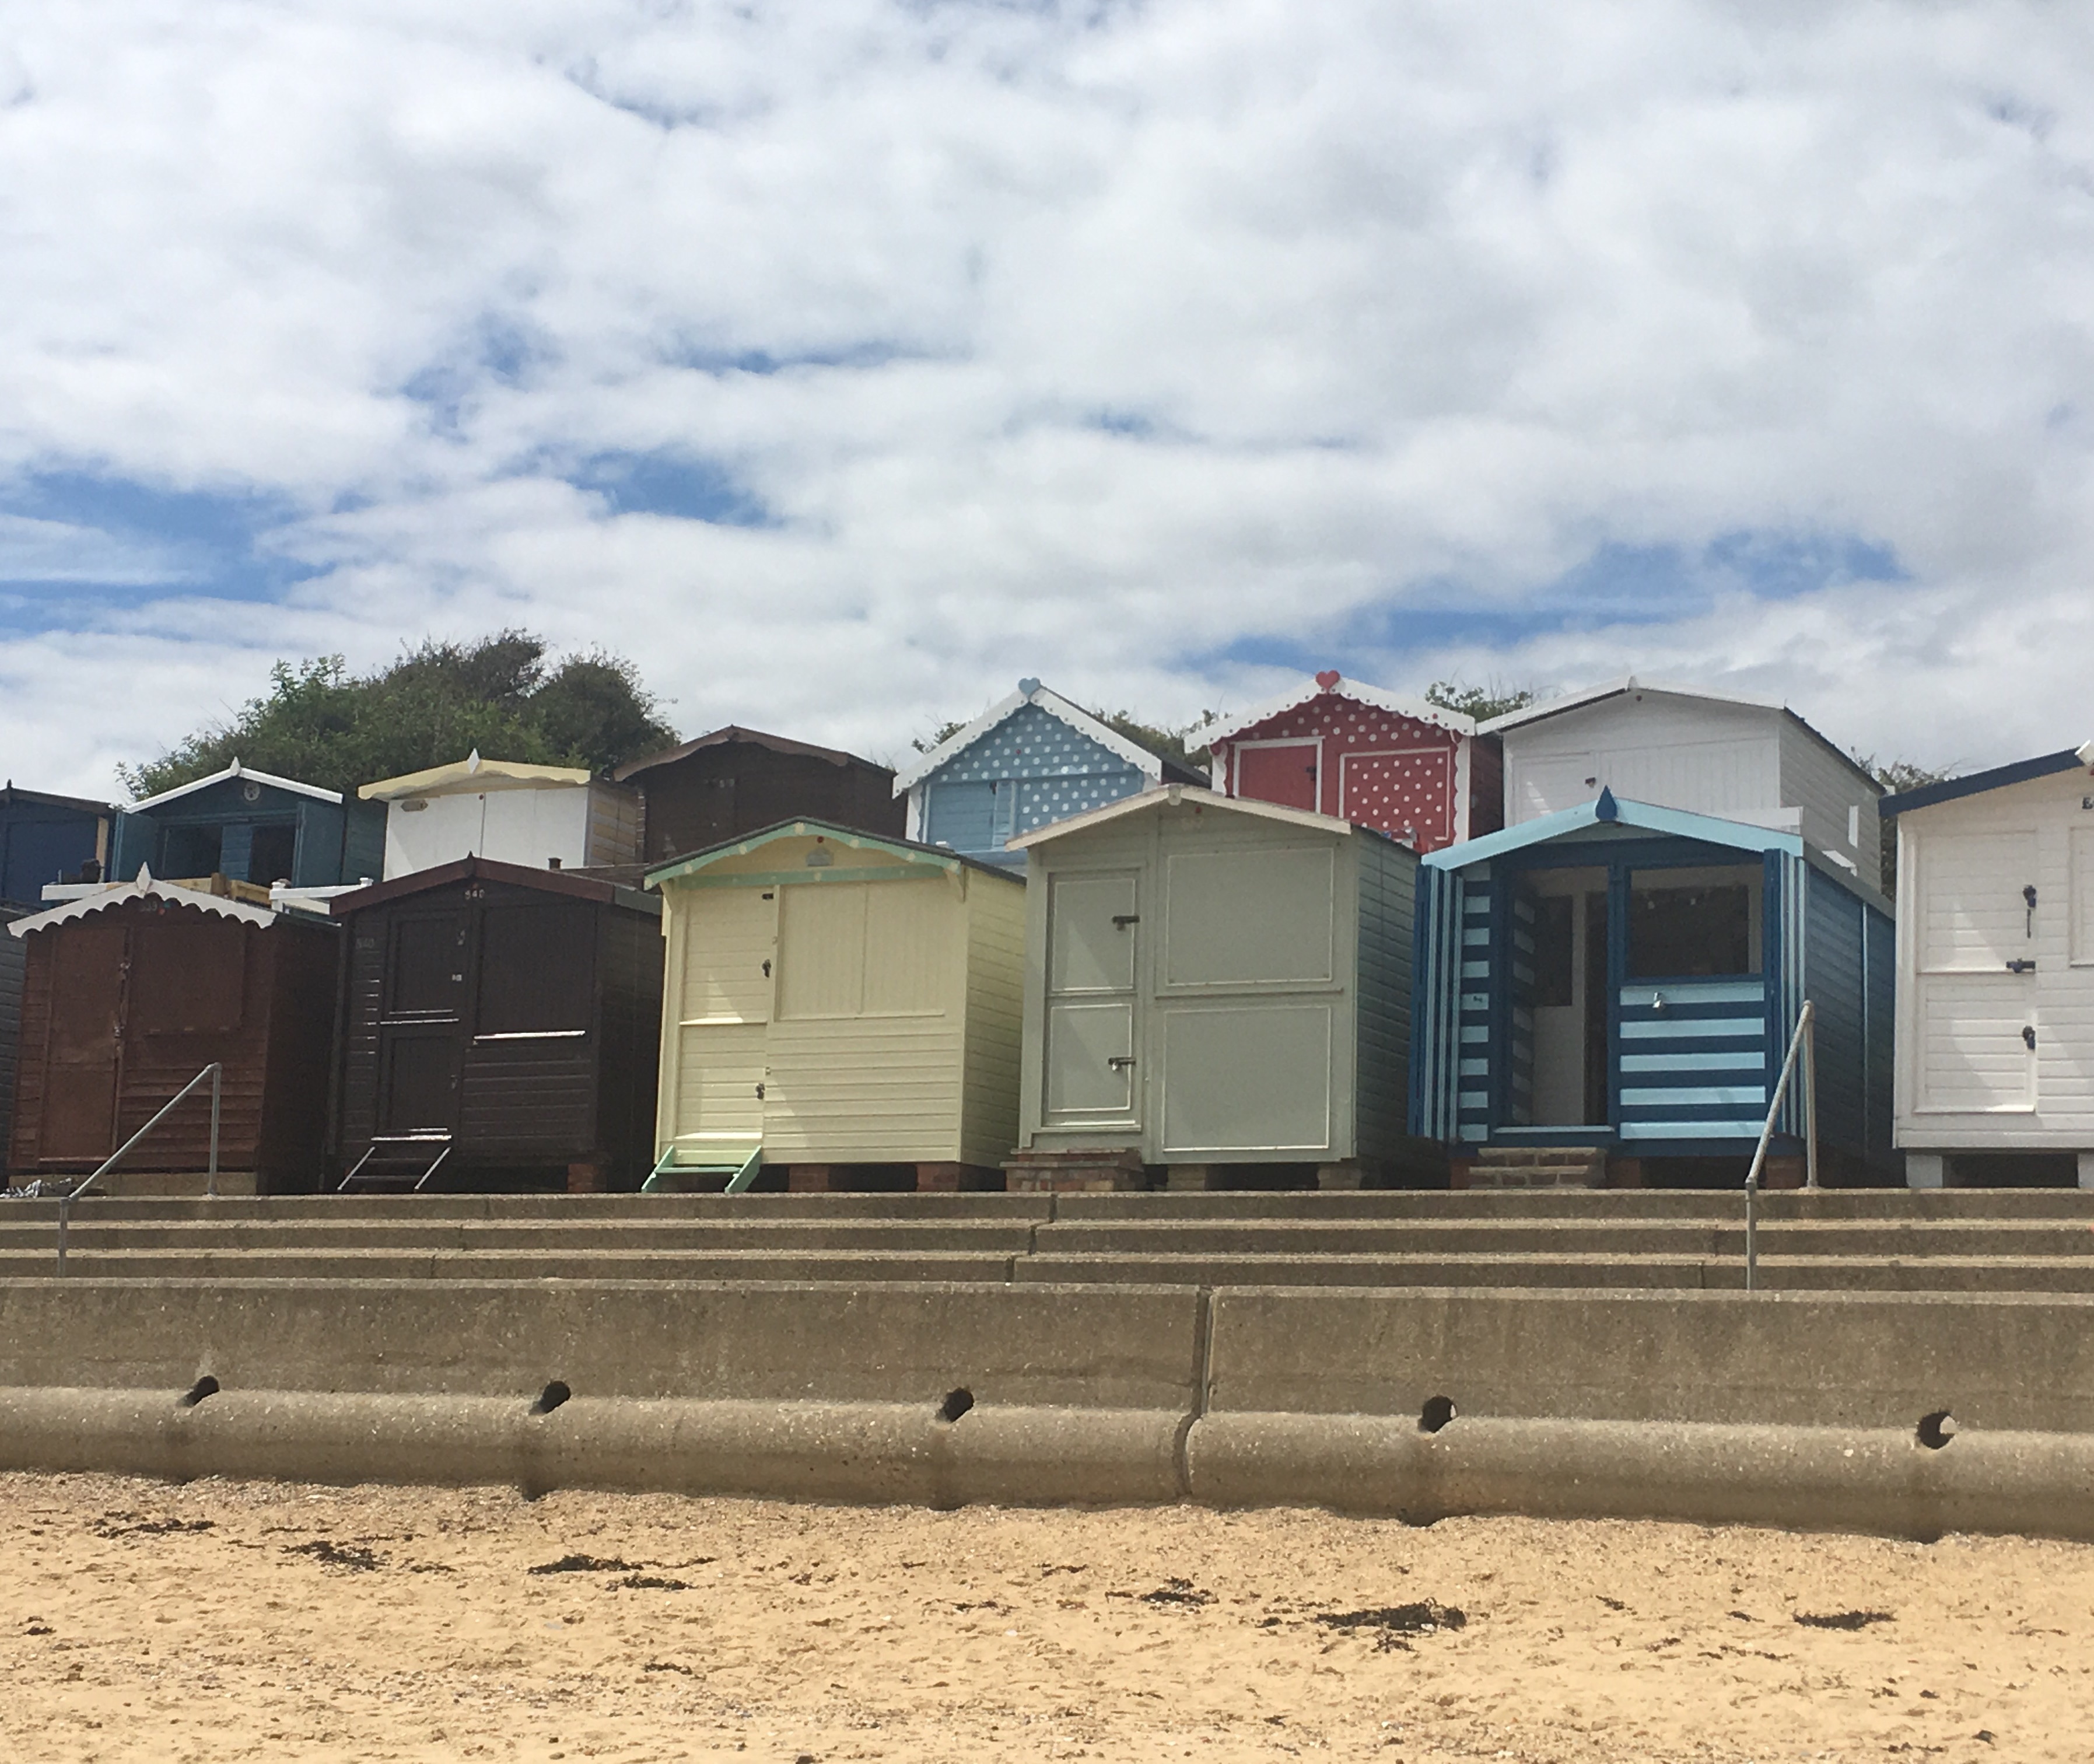 Sun, Sea and Seclusion: Beautiful Millie's Beach Huts